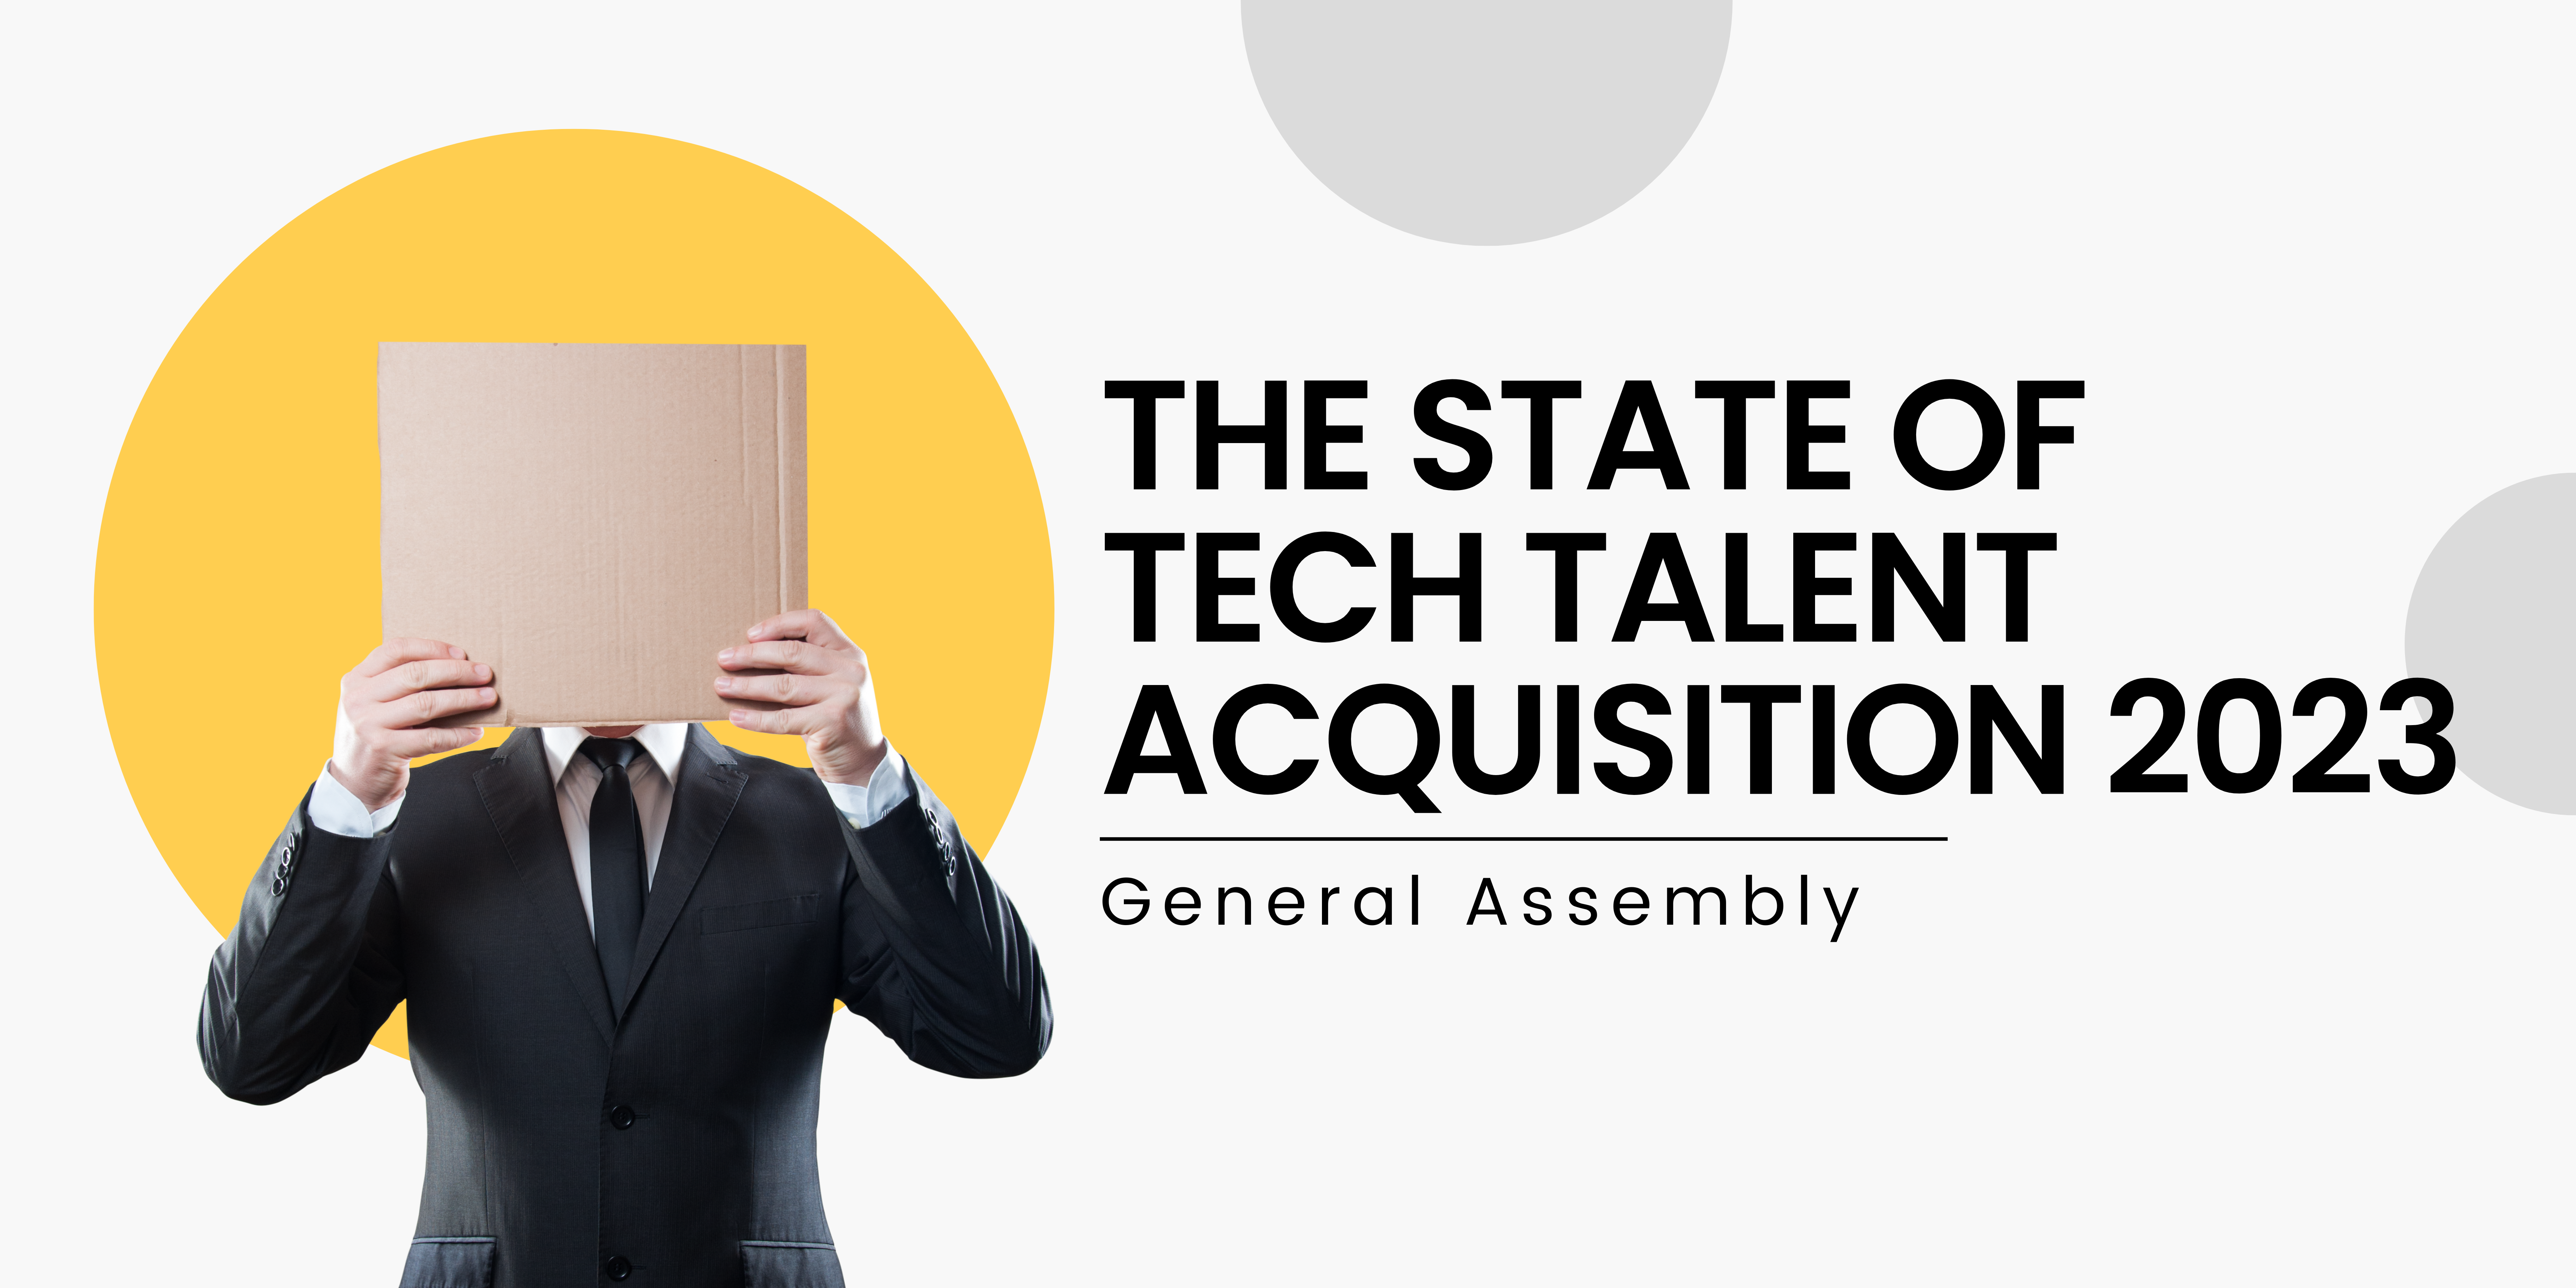 ga-the-state-of-tech-talent-acquisition-2023